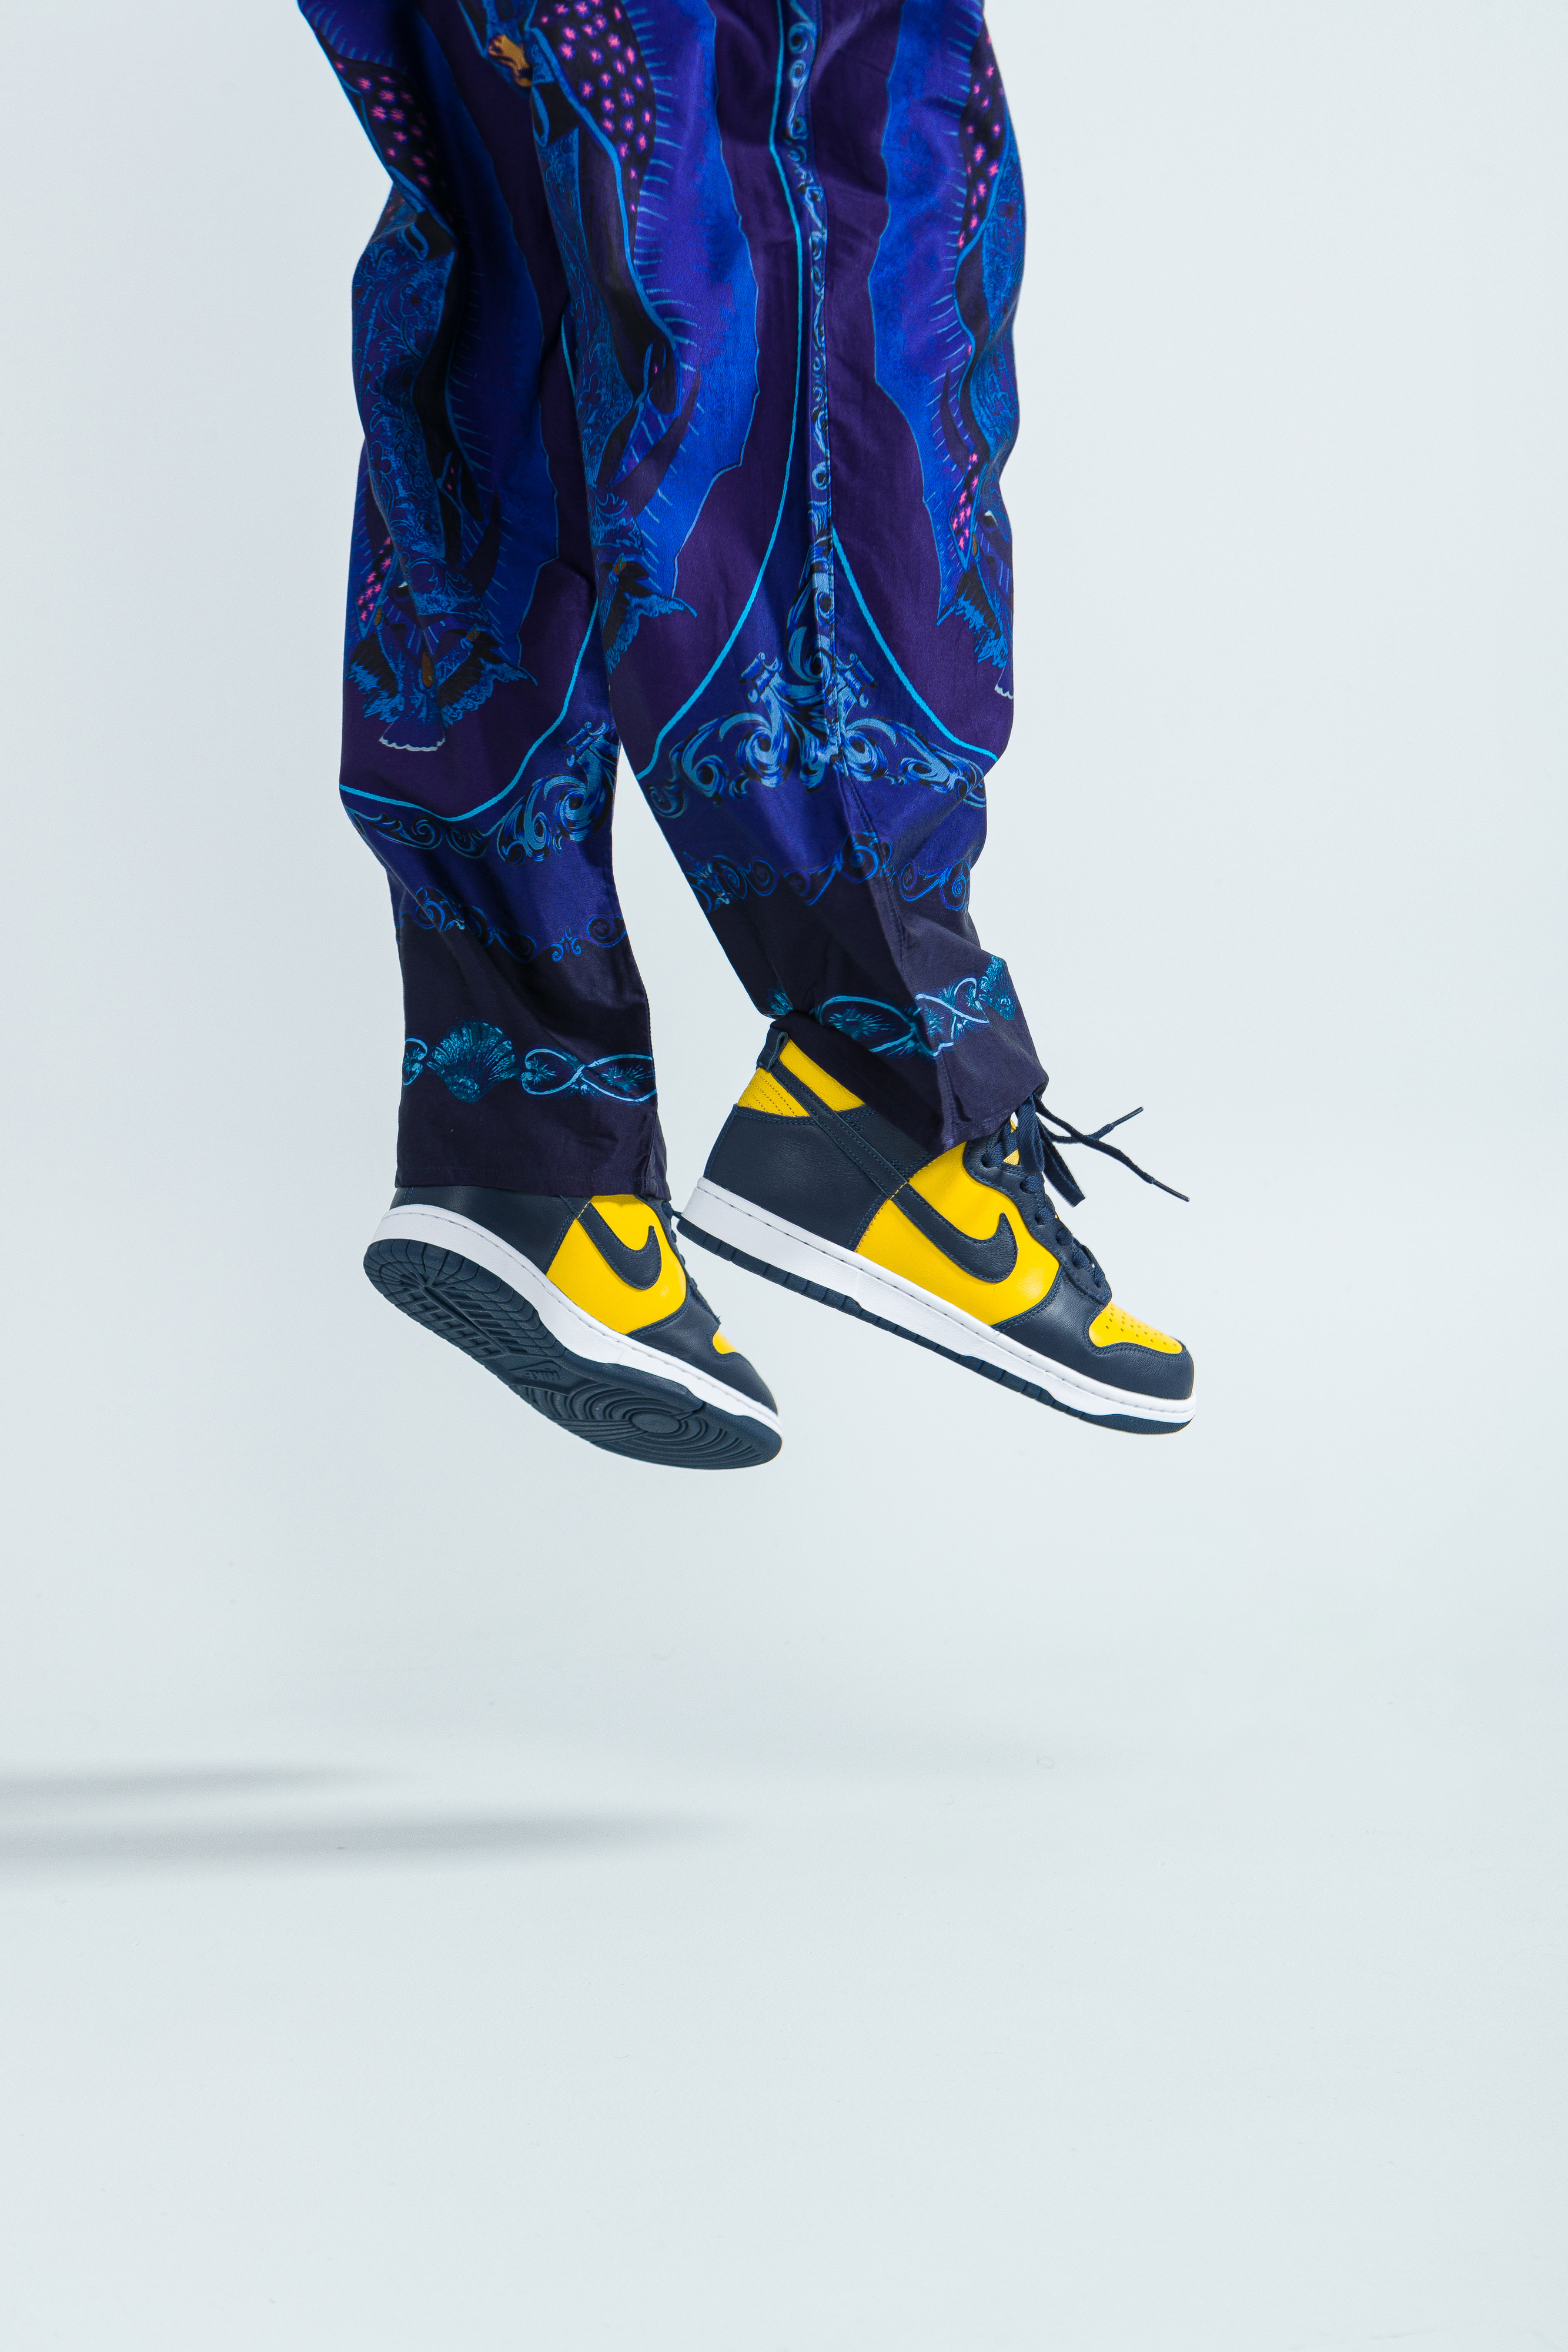 Launches - Nike Dunk High 'Michigan' | Up There